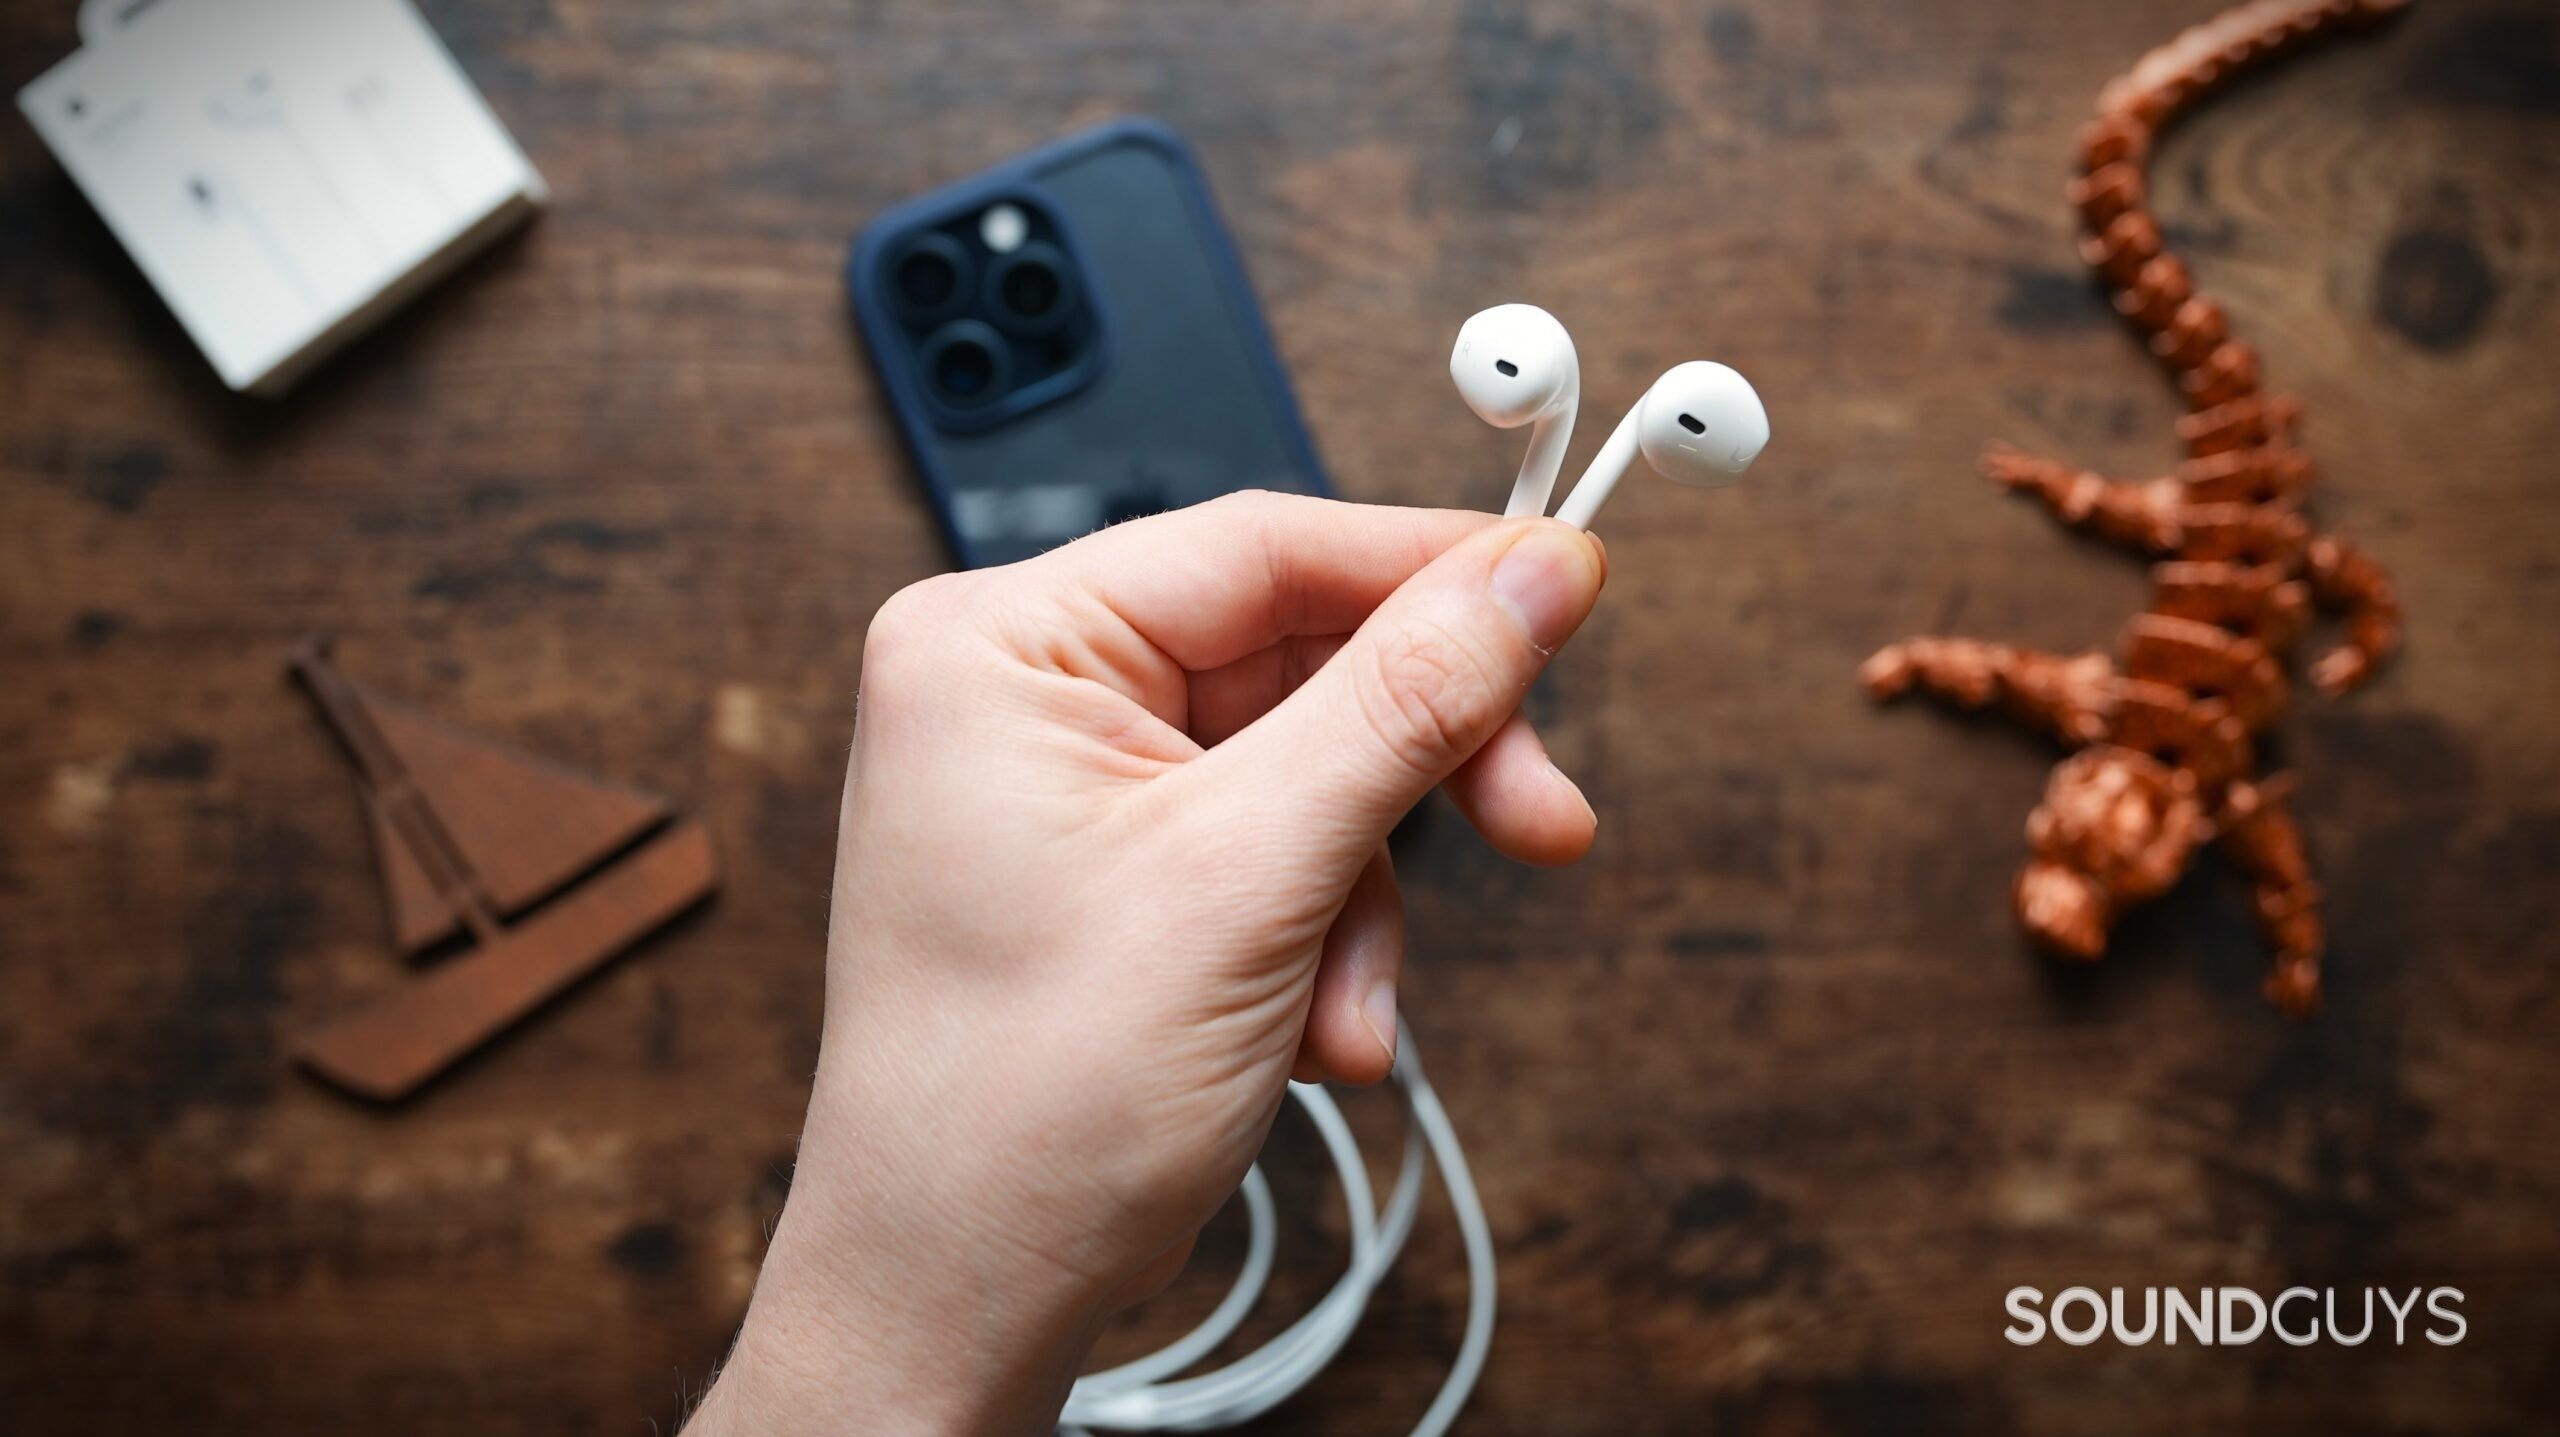 Apple USB C Earpods Review: The New $19 Lossless Audio Apple